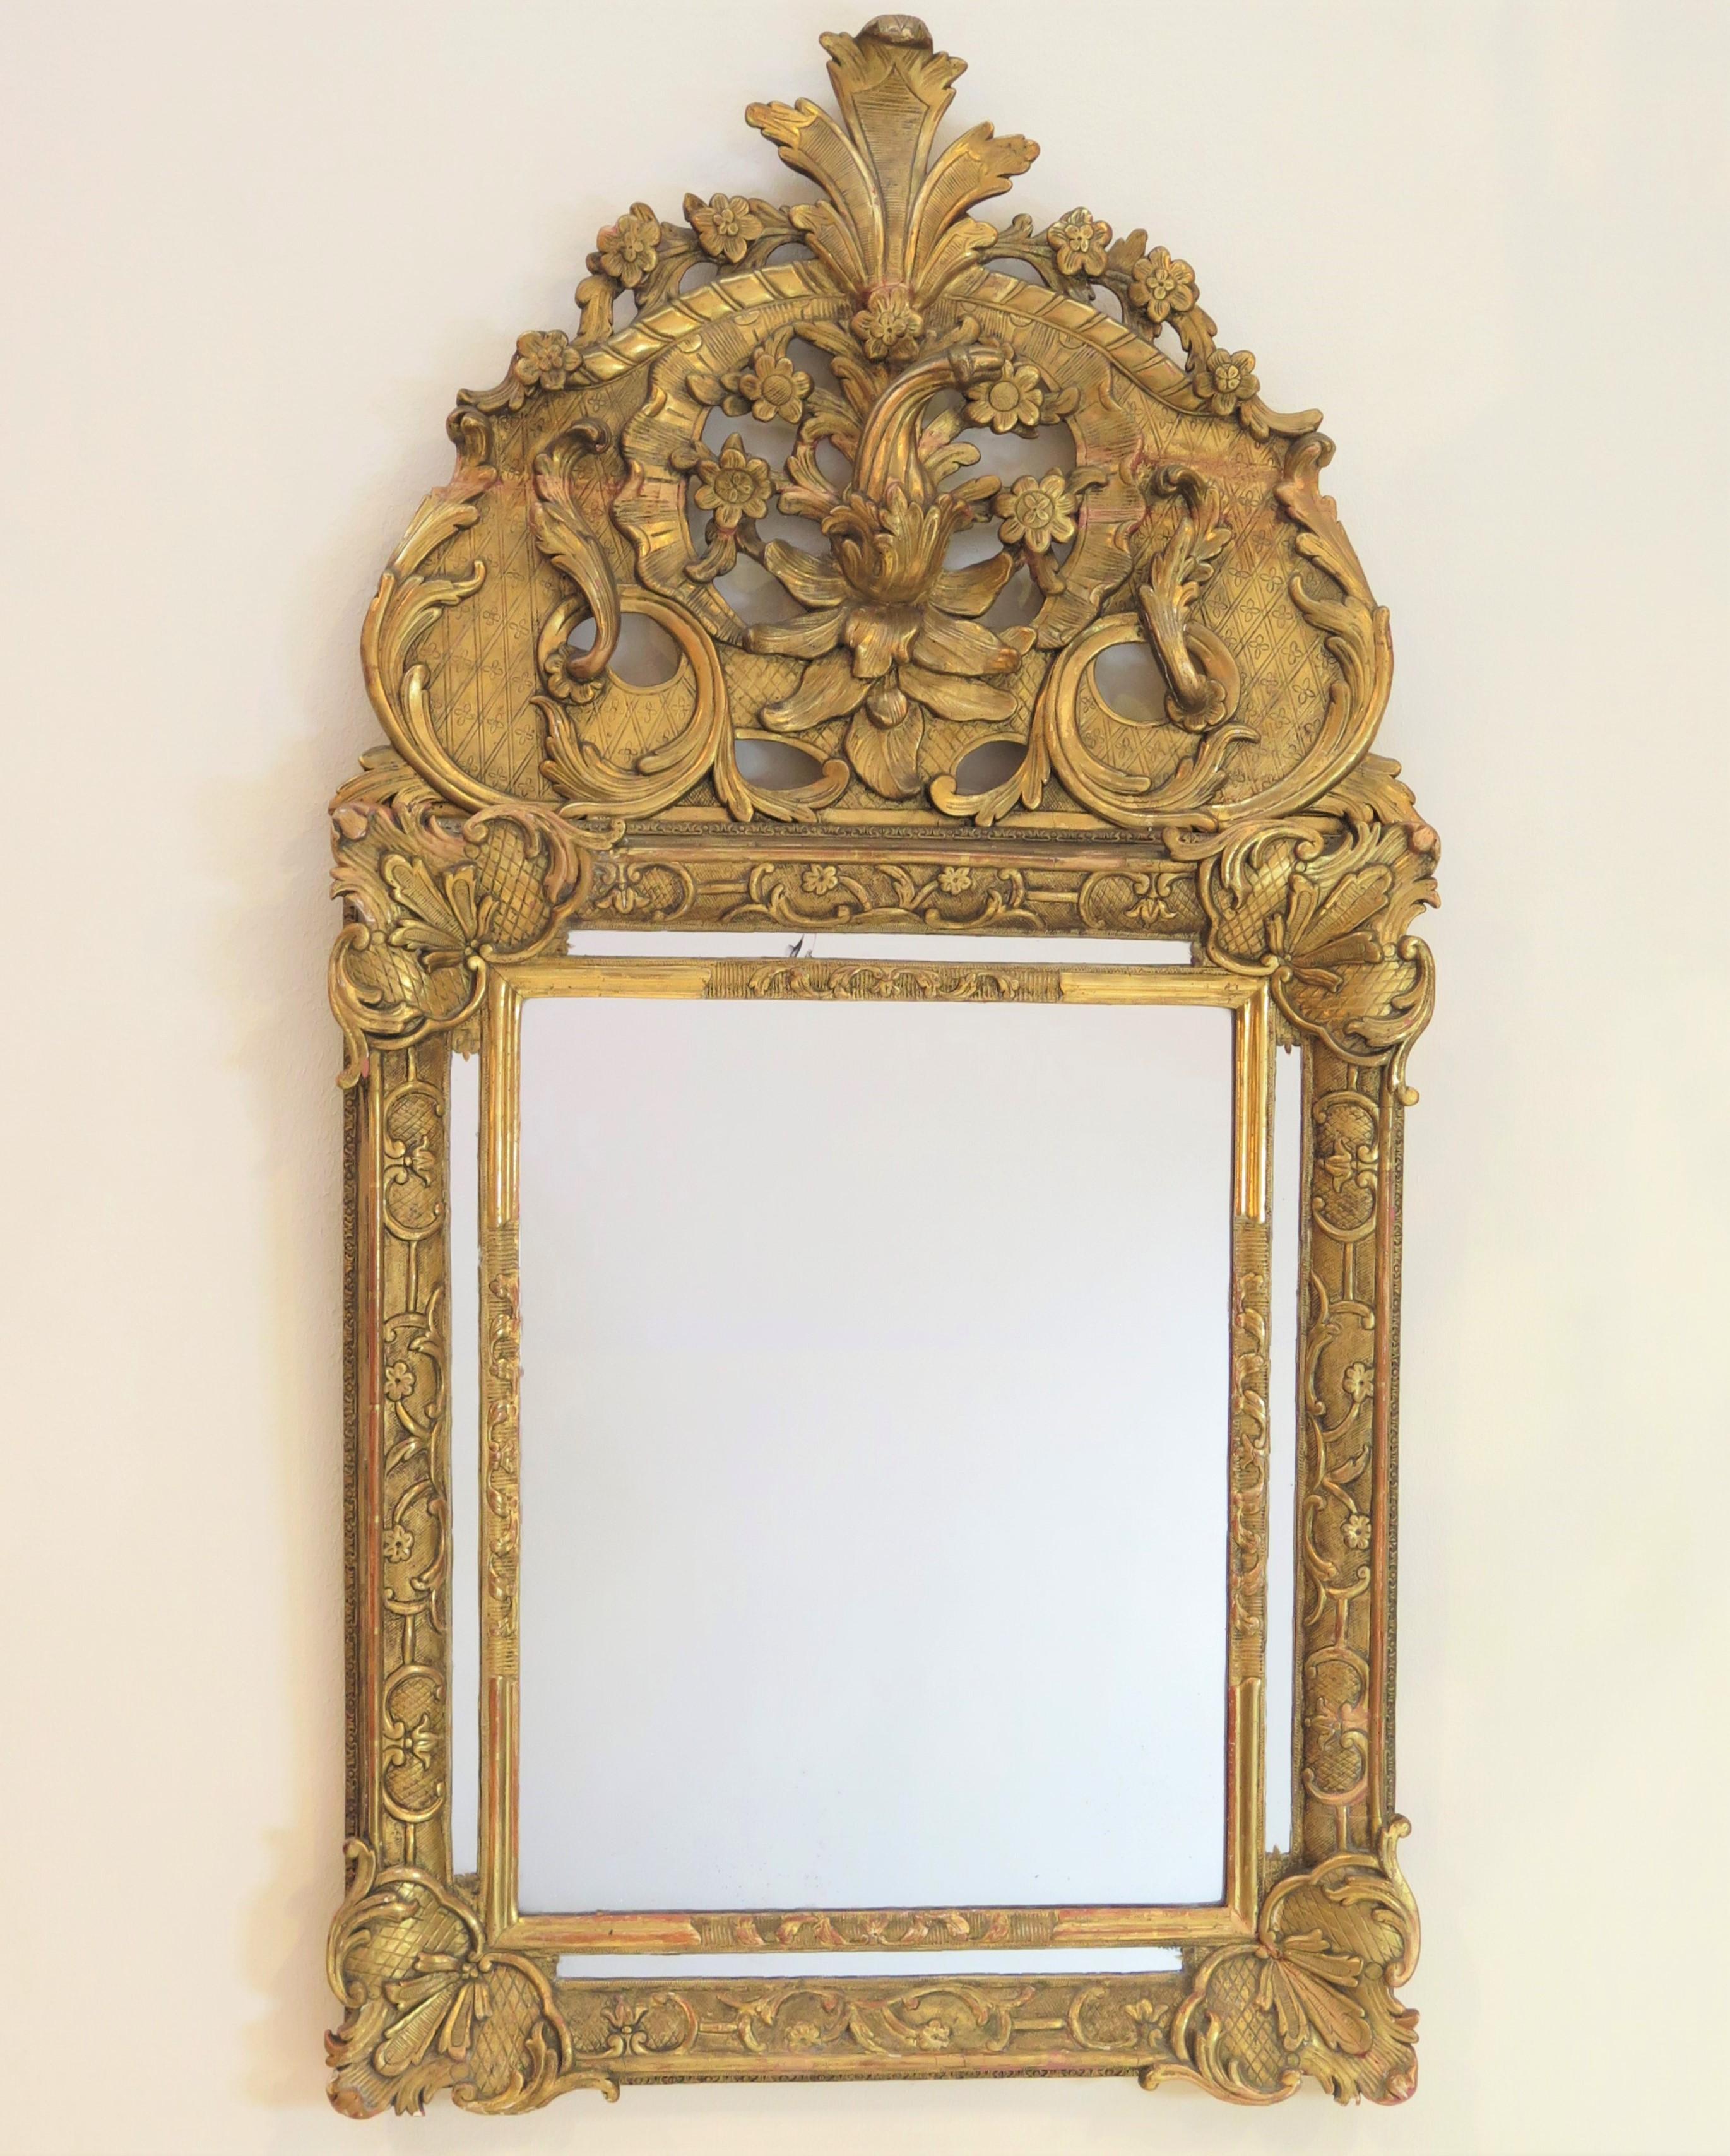 a Régence mirror, elaborately carved and gilded with squash / gourd pediment, France, 18th century